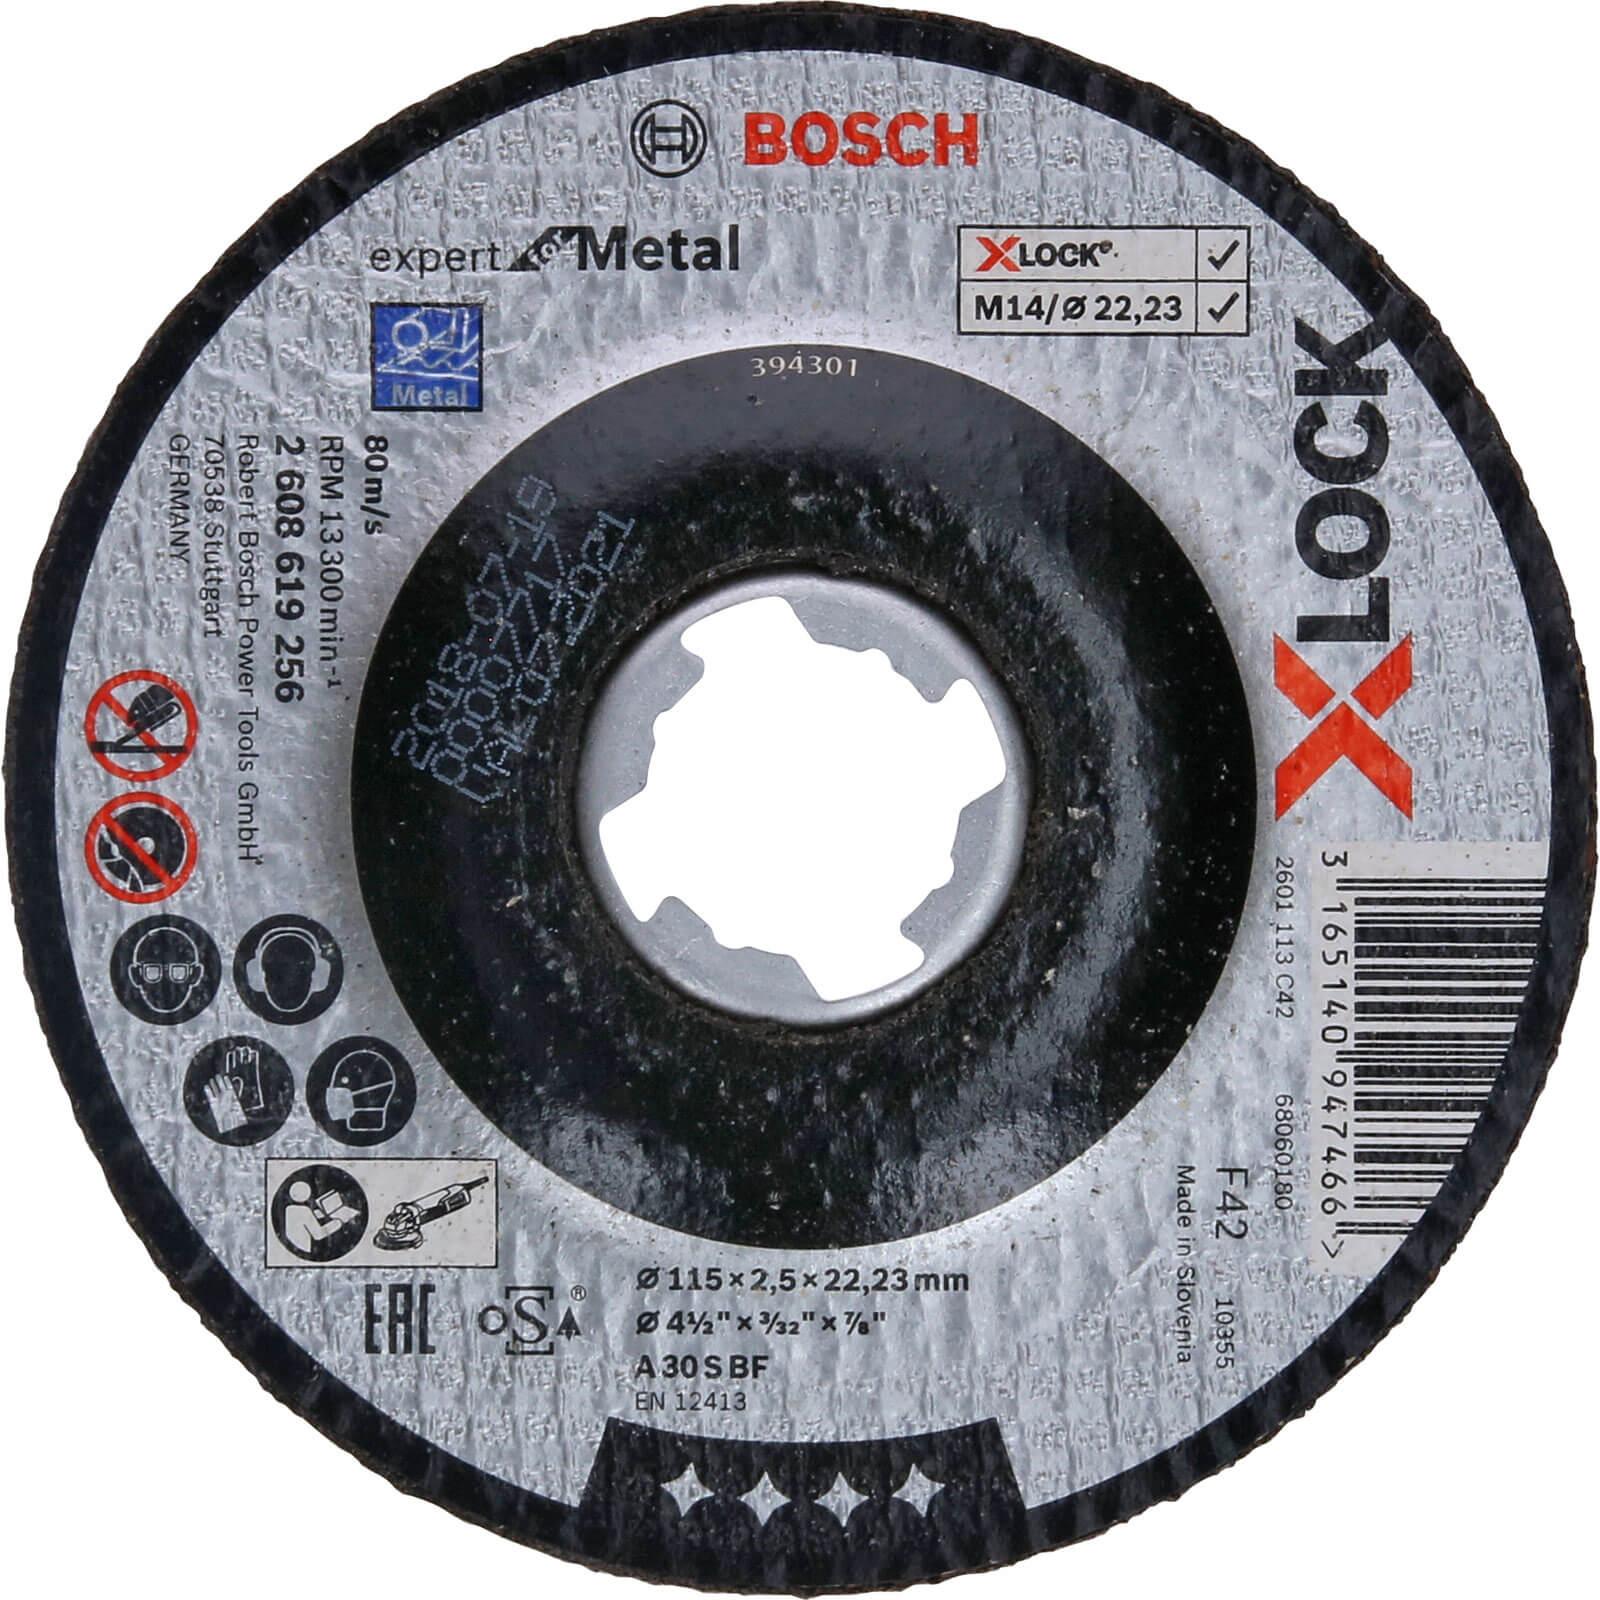 Image of Bosch Expert X Lock Depressed Centre Cutting Disc for Metal 115mm 2.5mm 22mm